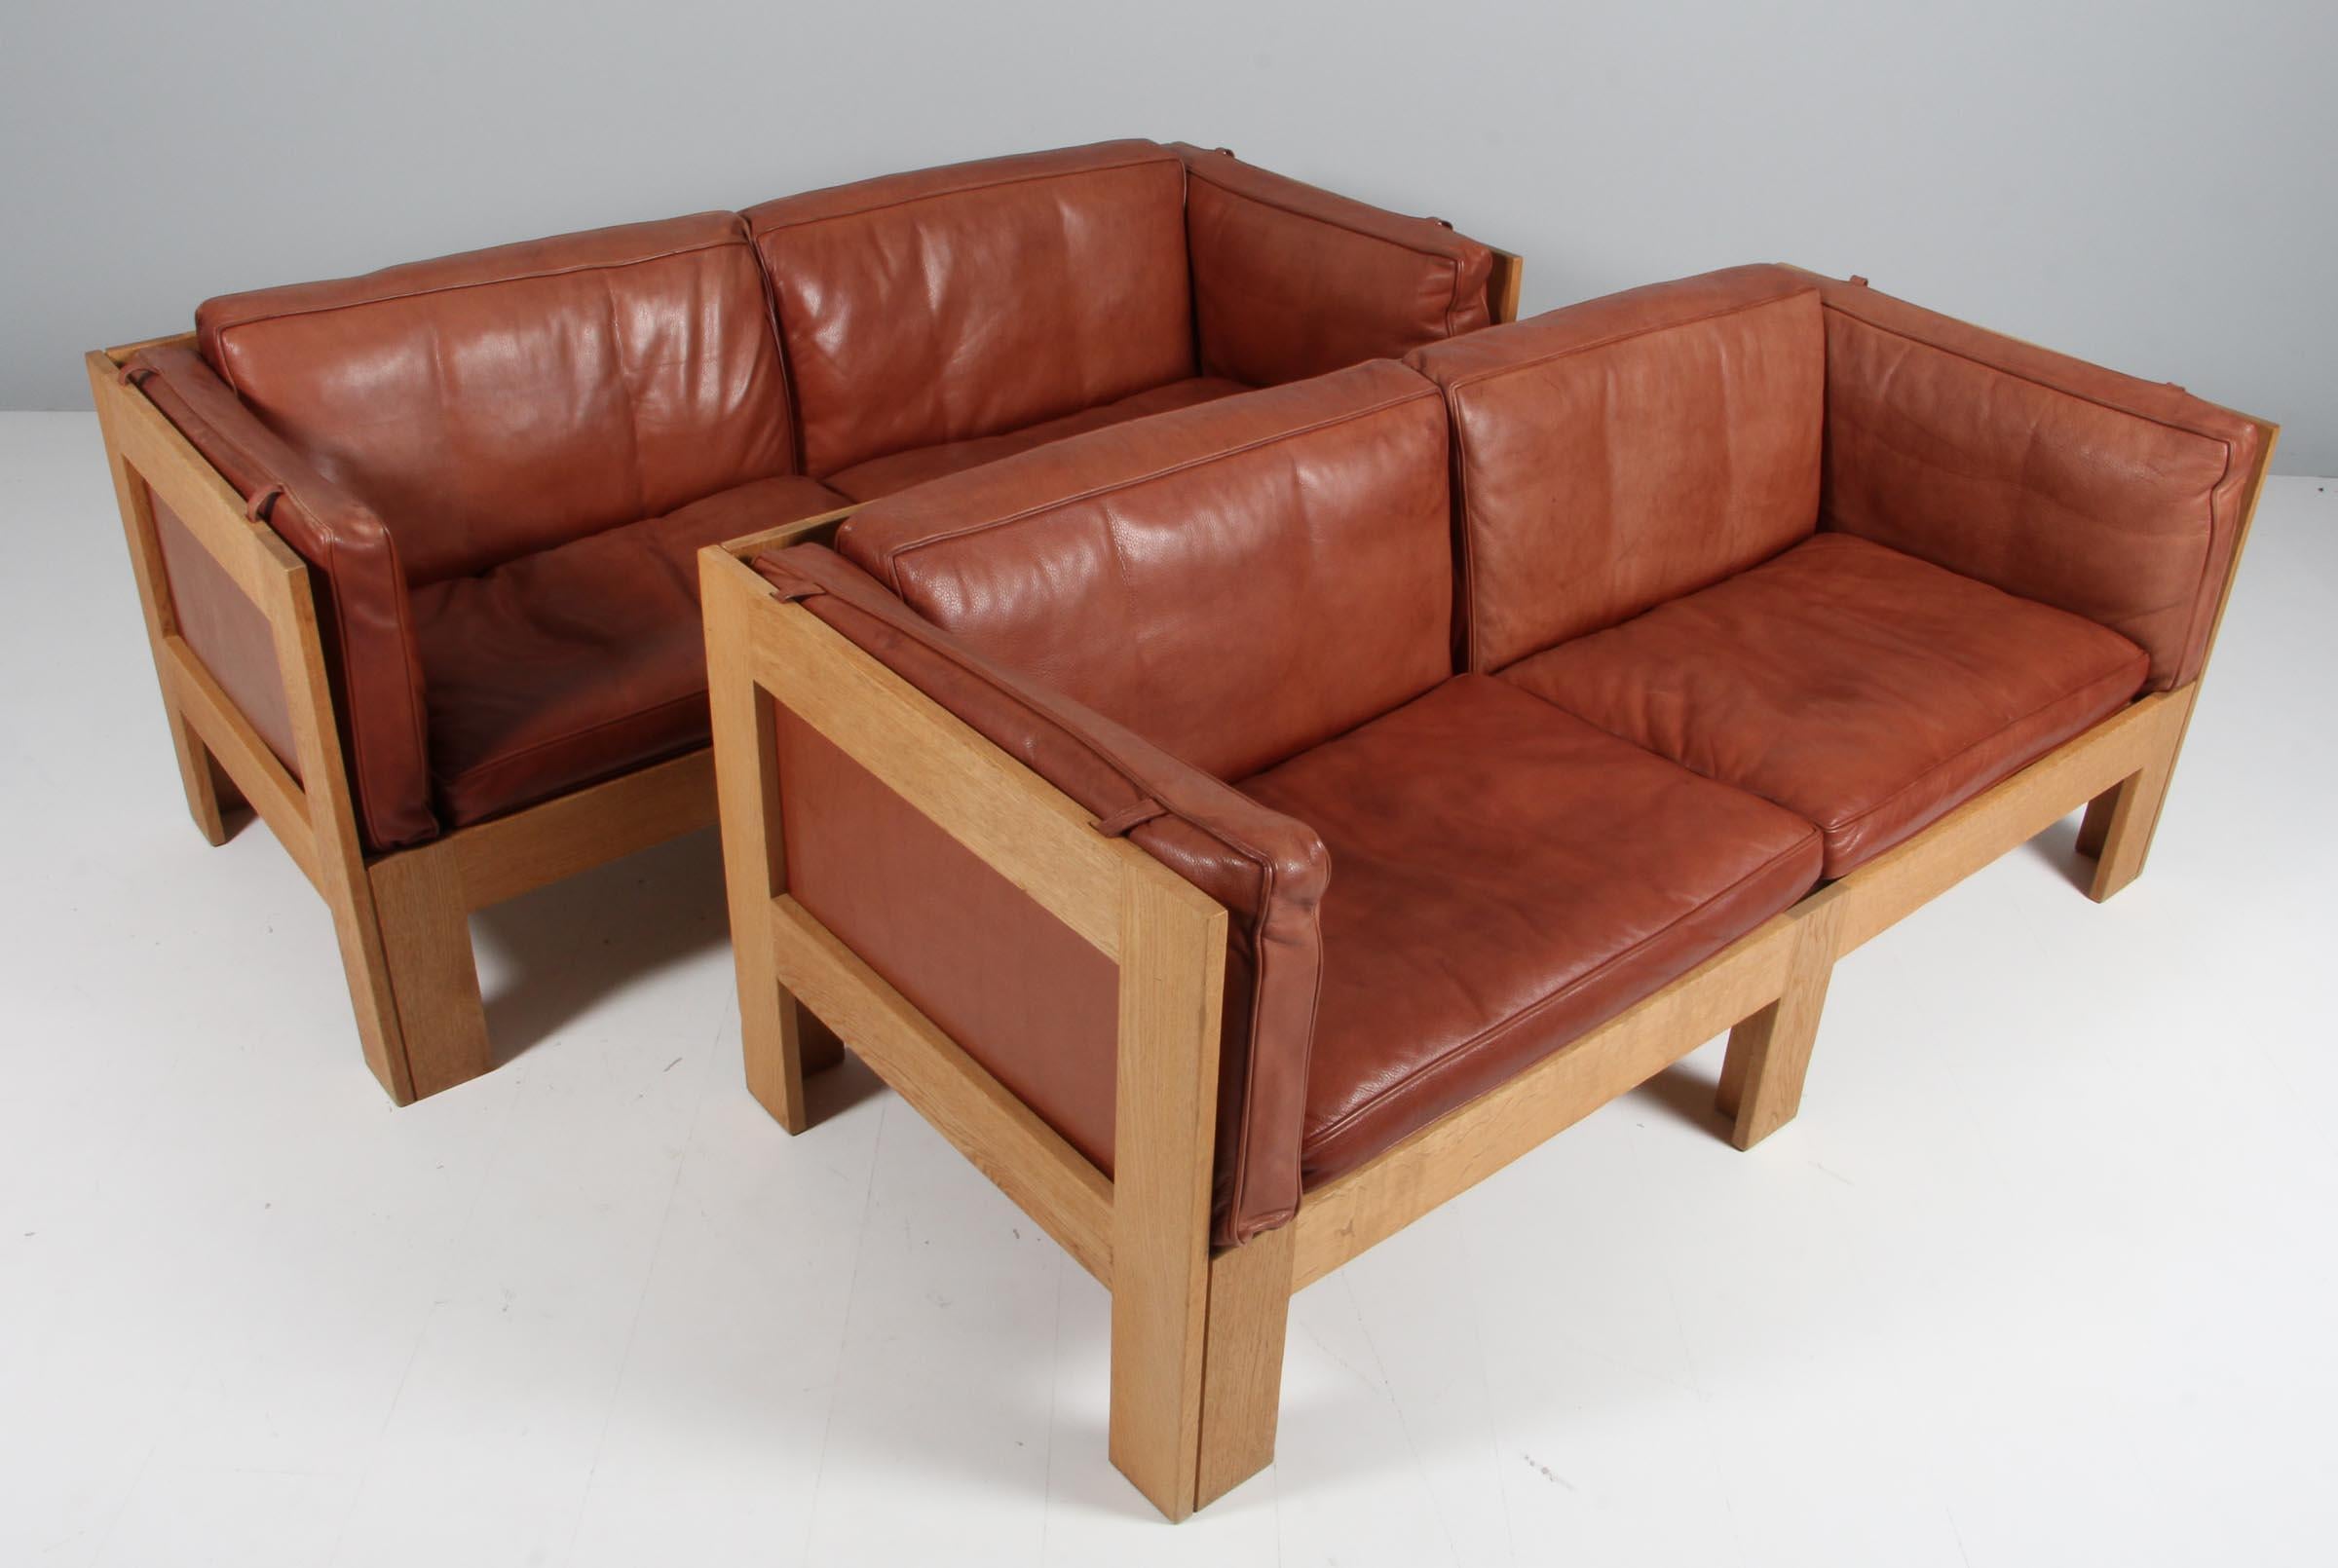 Tage Poulsen two seater sofa in oak and patinated aniline leather.

Nylon webbing as straps.